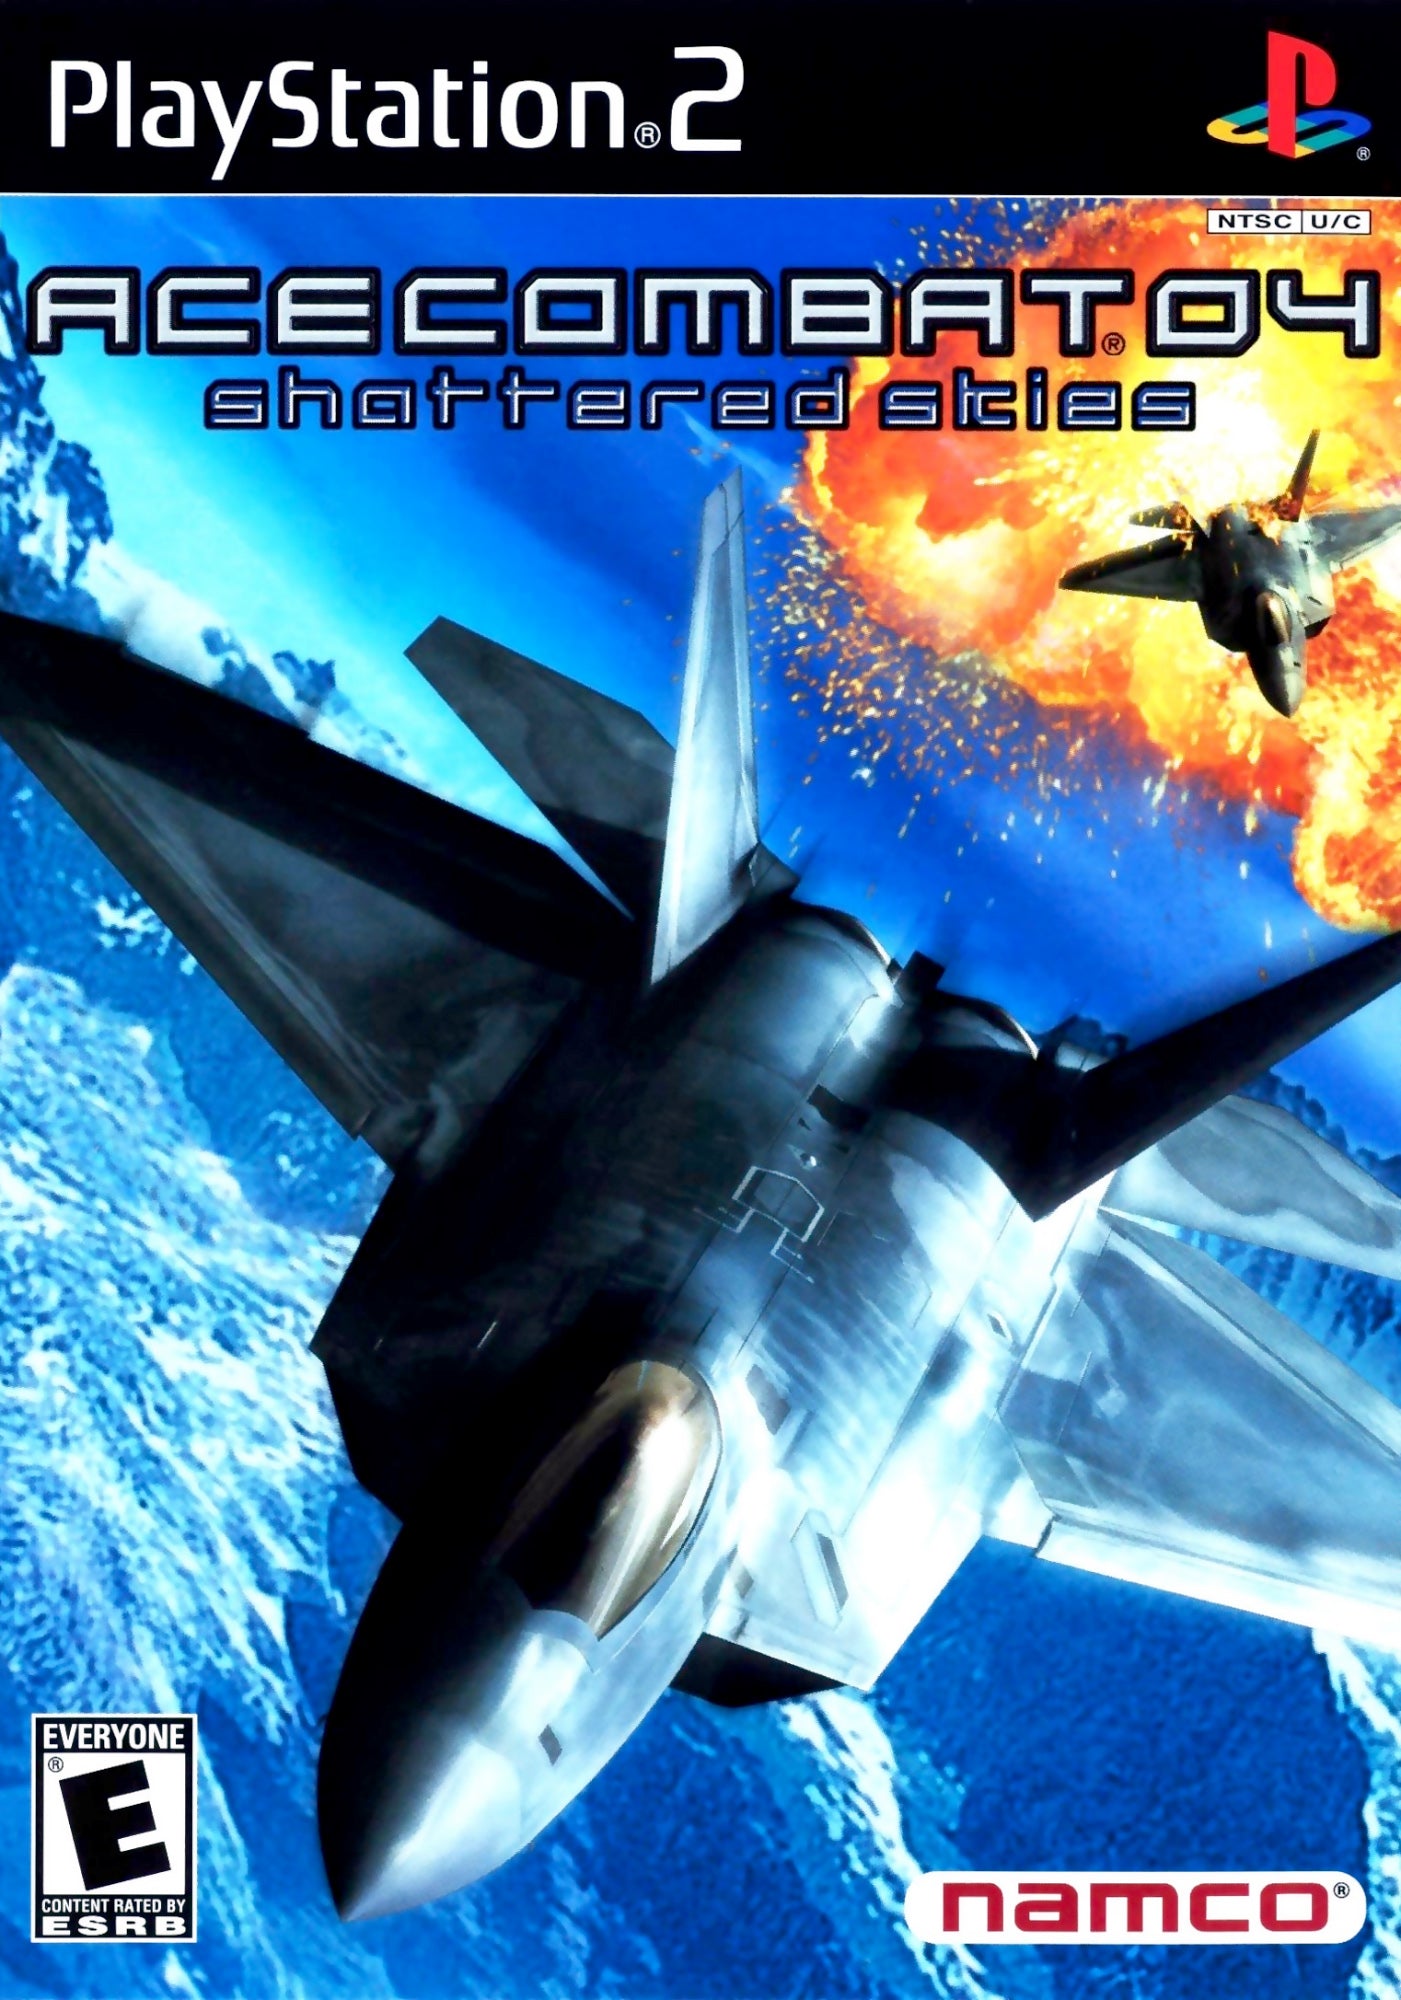 Ace Combat 04: Shattered Skies - PlayStation 2 (PS2) Game - YourGamingShop.com - Buy, Sell, Trade Video Games Online. 120 Day Warranty. Satisfaction Guaranteed.